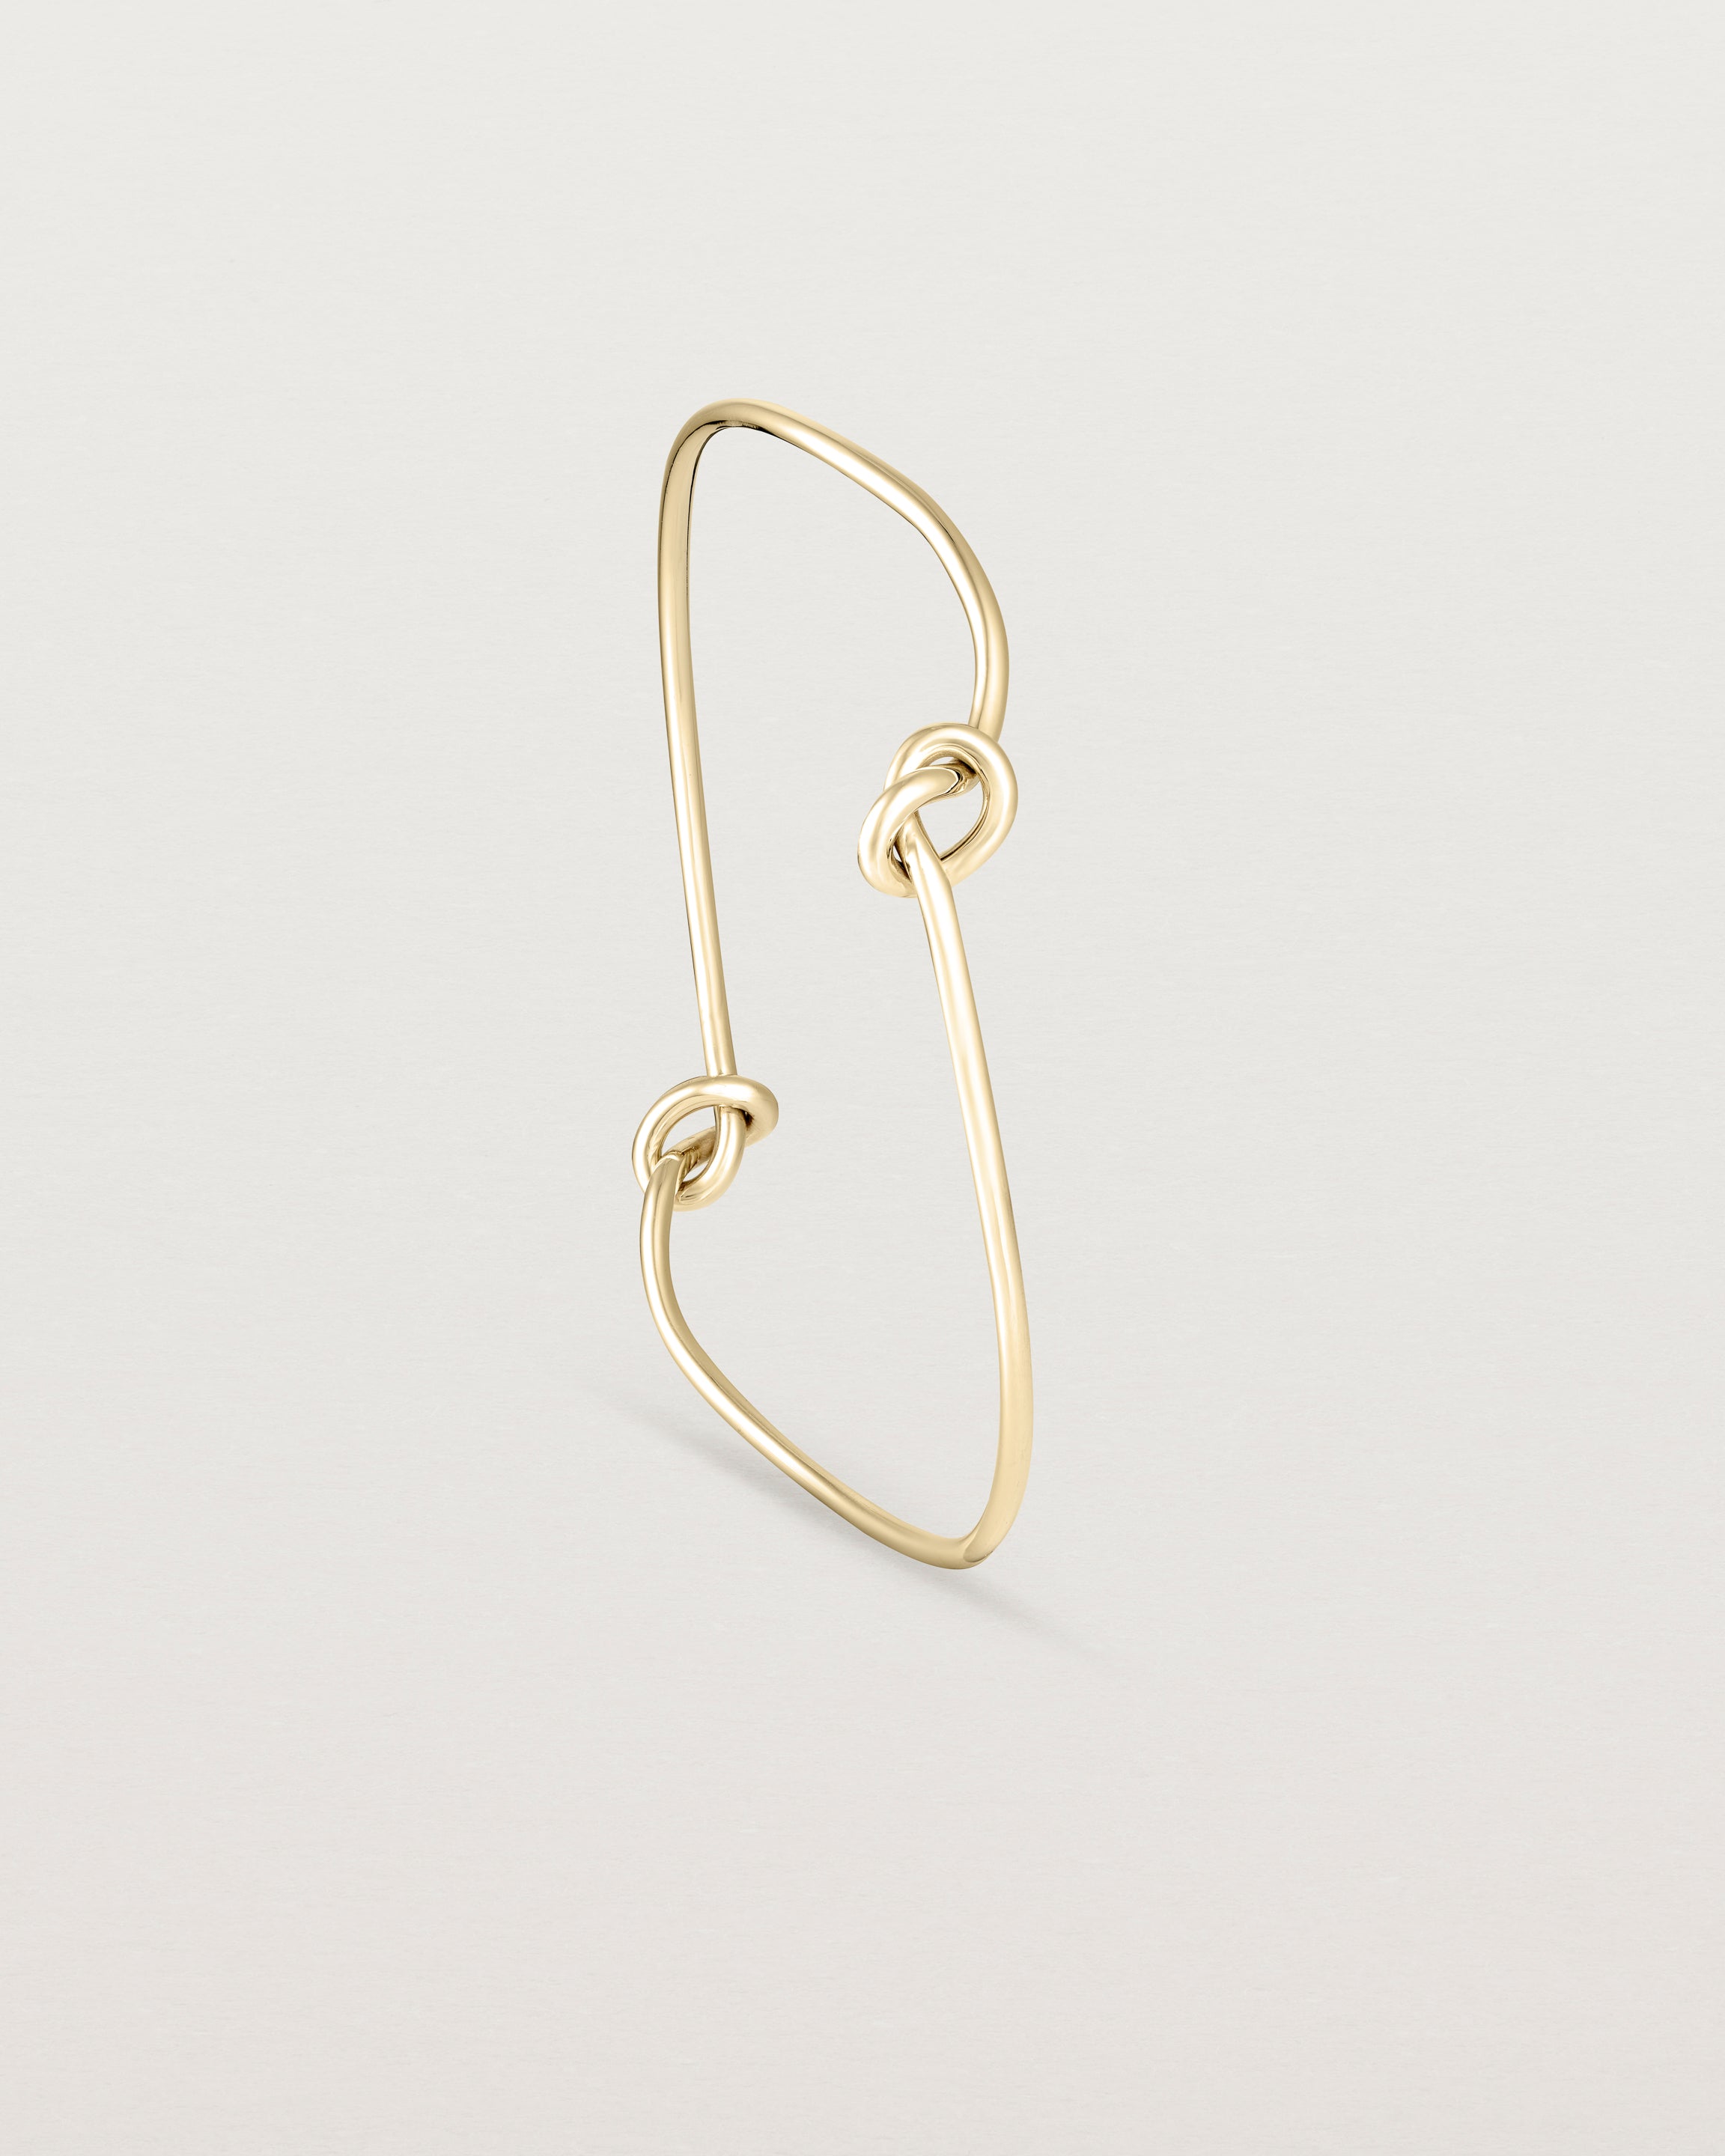 Standing view of the Dà anam Bangle in yellow gold.